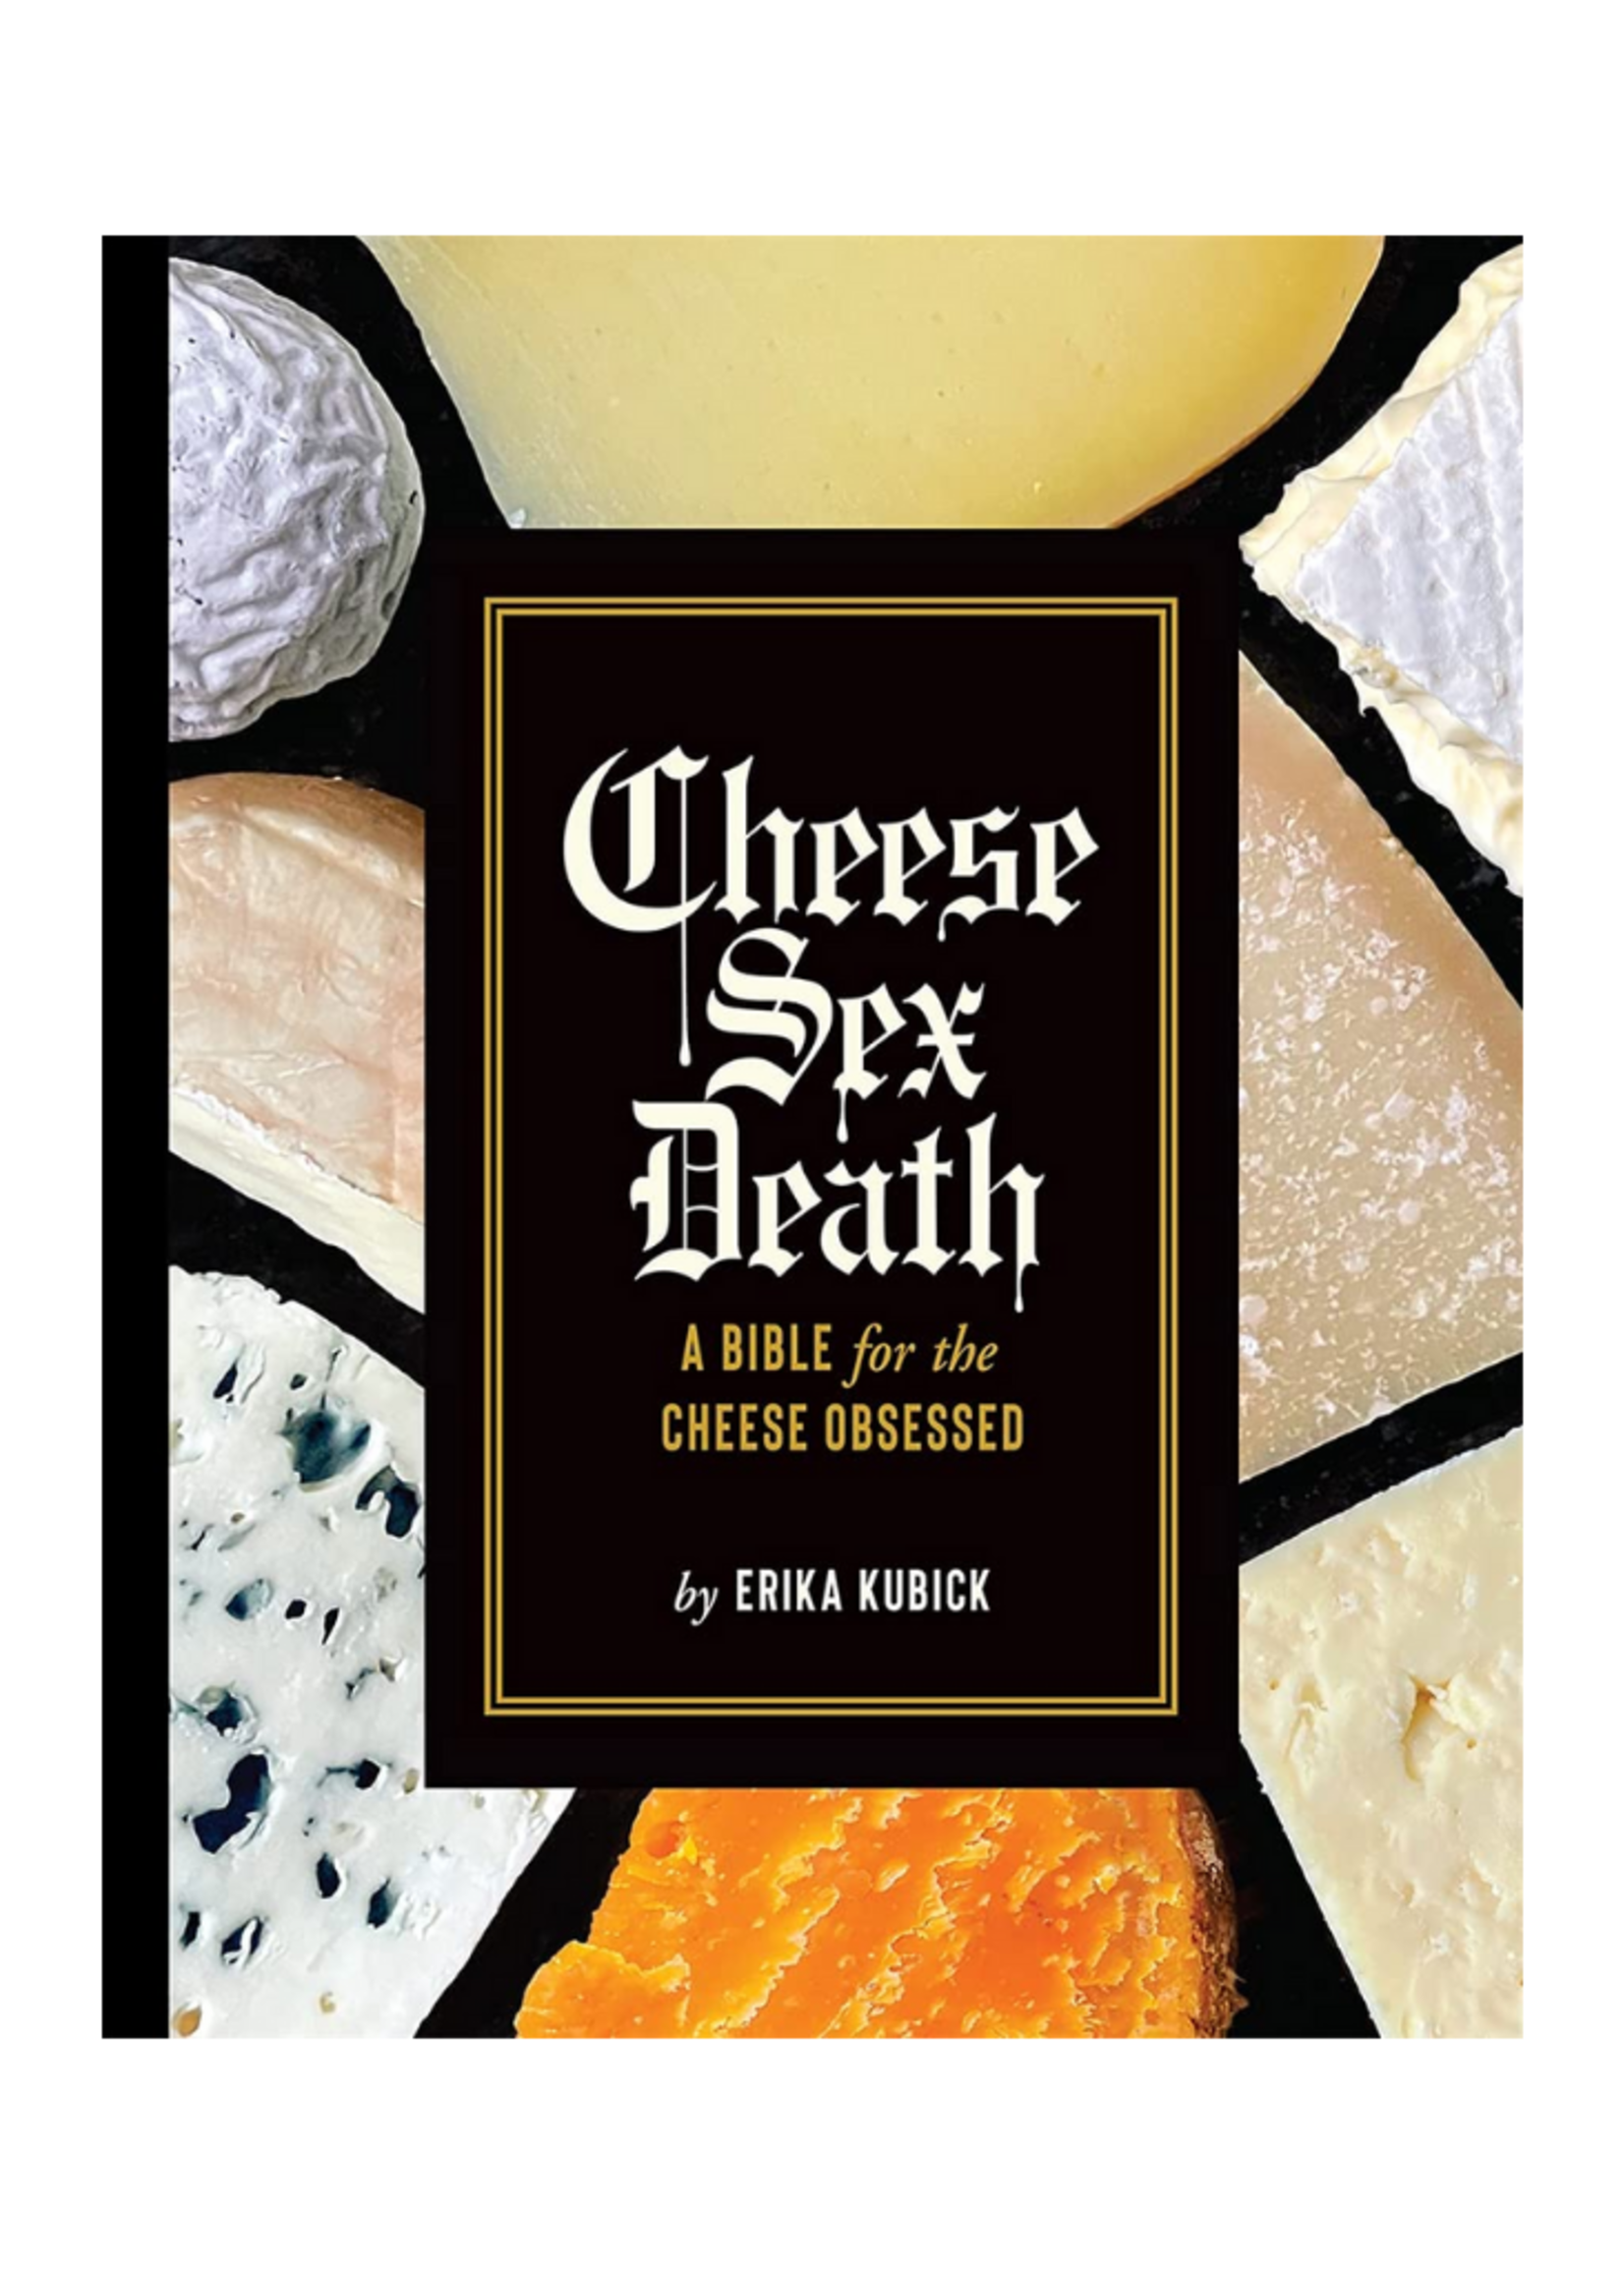 Abrams Sterart Tabori&Chang Cheese Sex Death: A Bible for the Cheese Obsessed by Erika Kubick